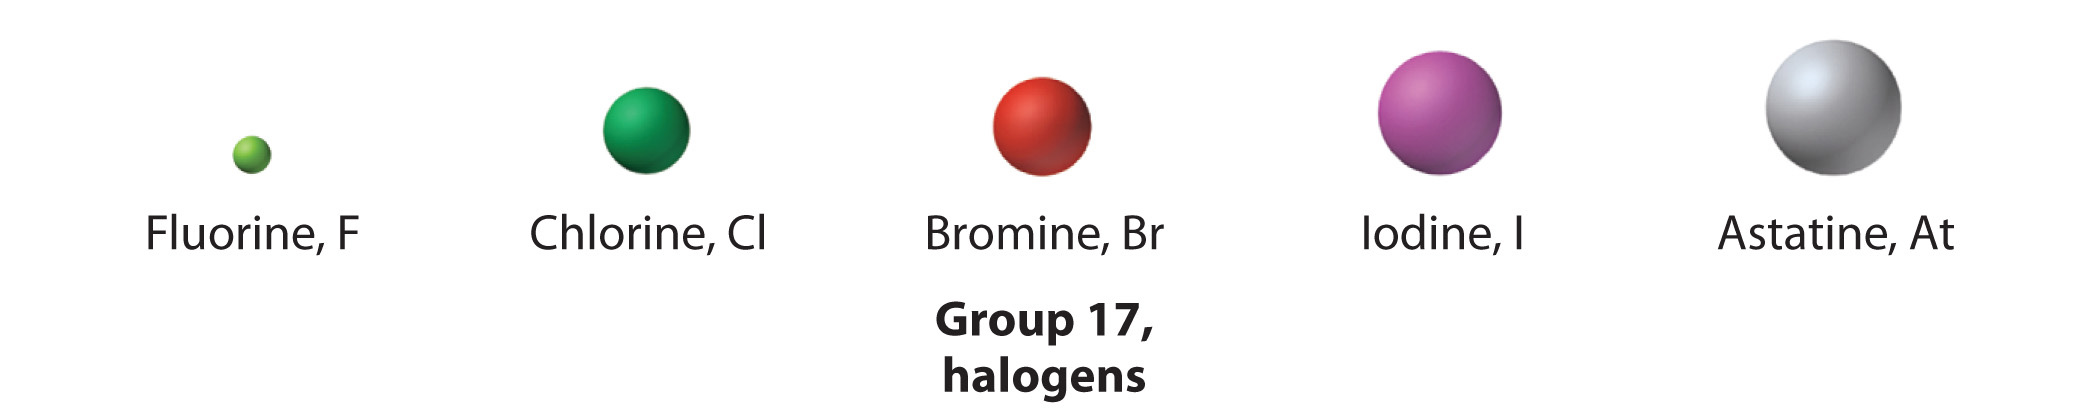 The elements of group 17, the halogens, are shown.